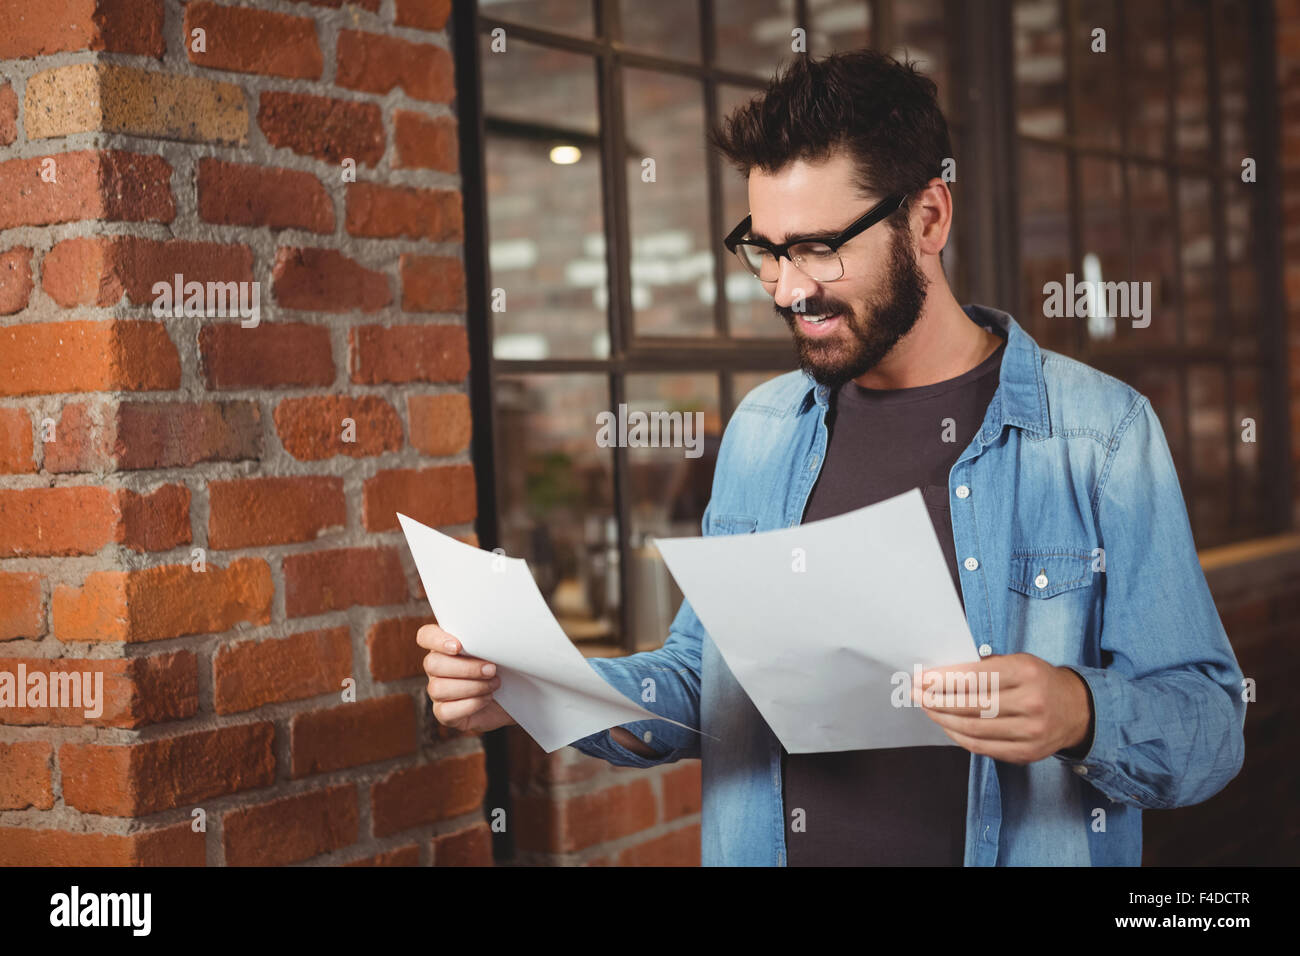 Happy man holding papers Stock Photo